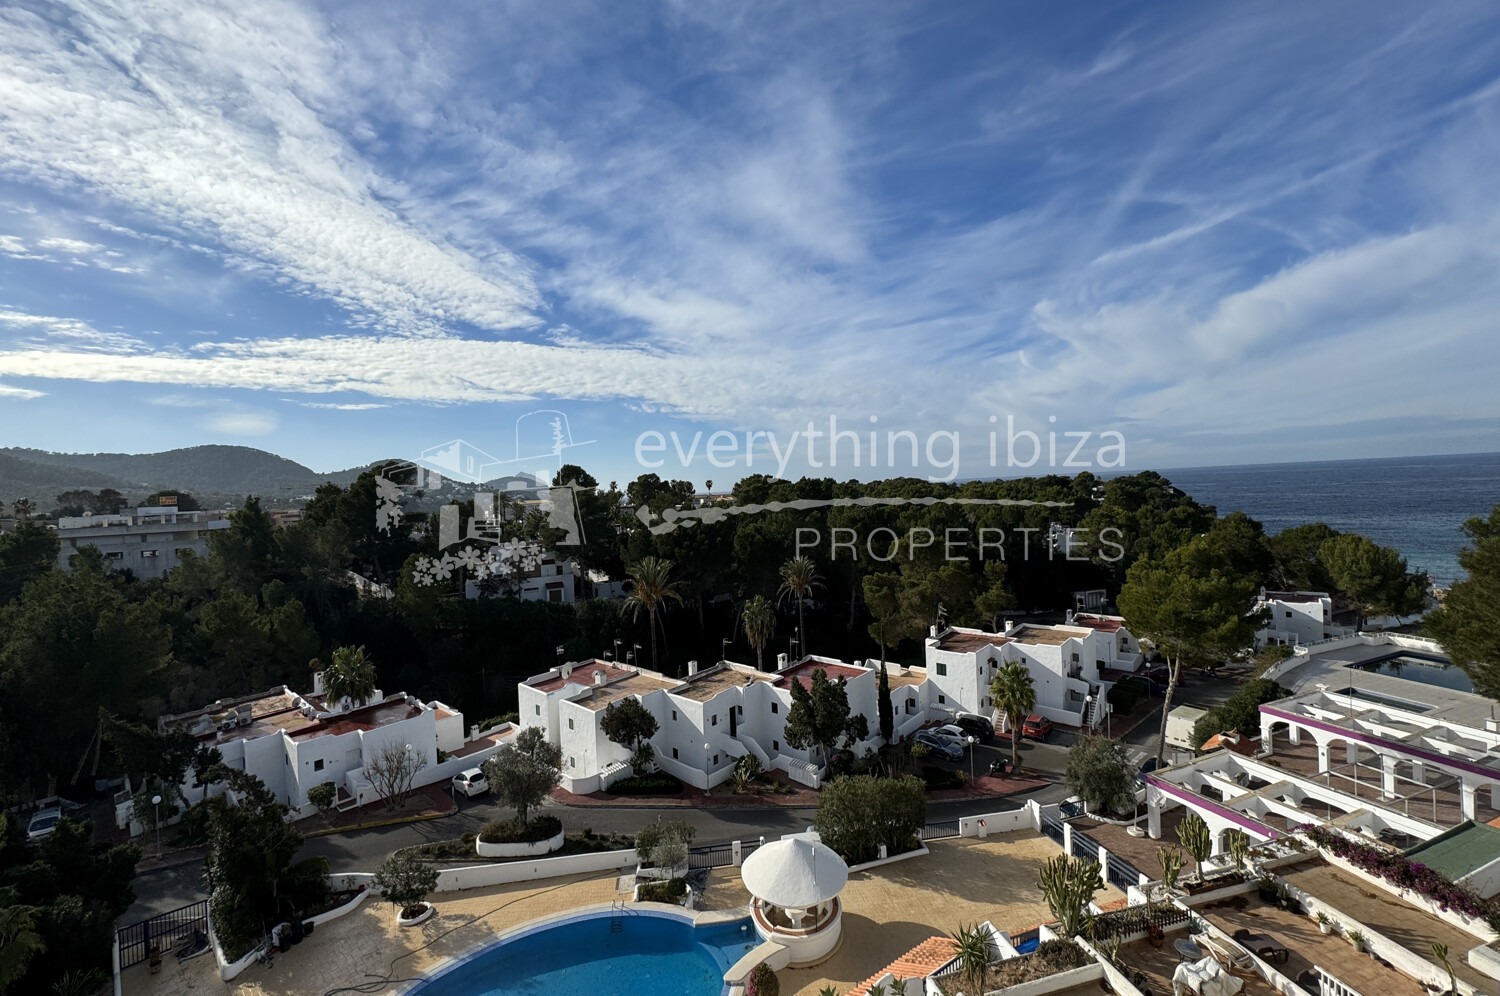 Penthouse Apartment with Sunsets and Views over Es Vedra, ref. 1657, for sale in Ibiza by everything ibiza Properties